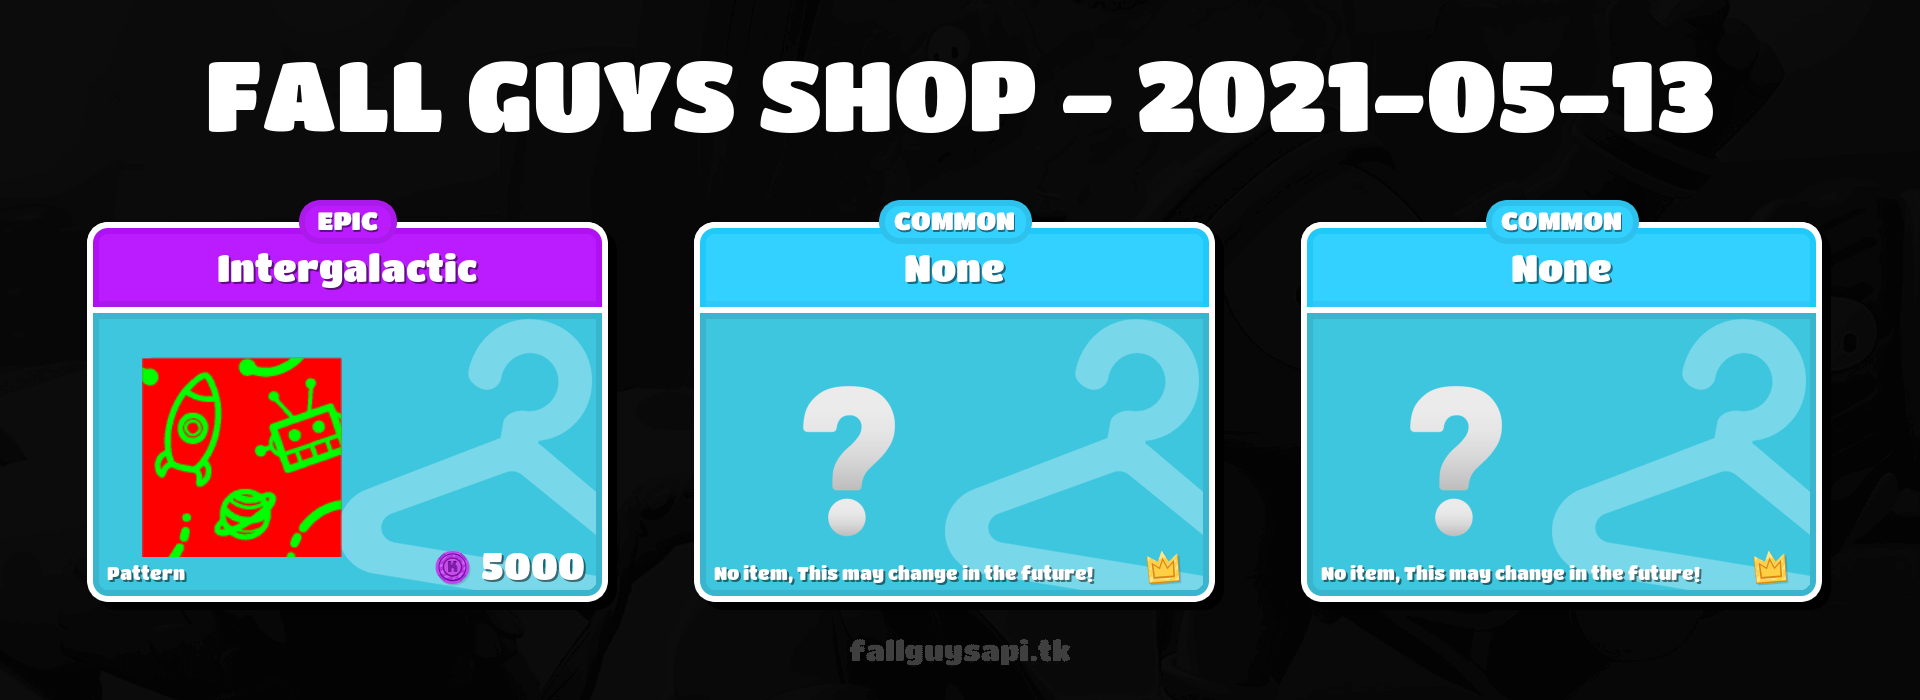 Fall Guys: Ultimate Knockout - [S4] Featured shop - What's on sale? - May 13 - May 16